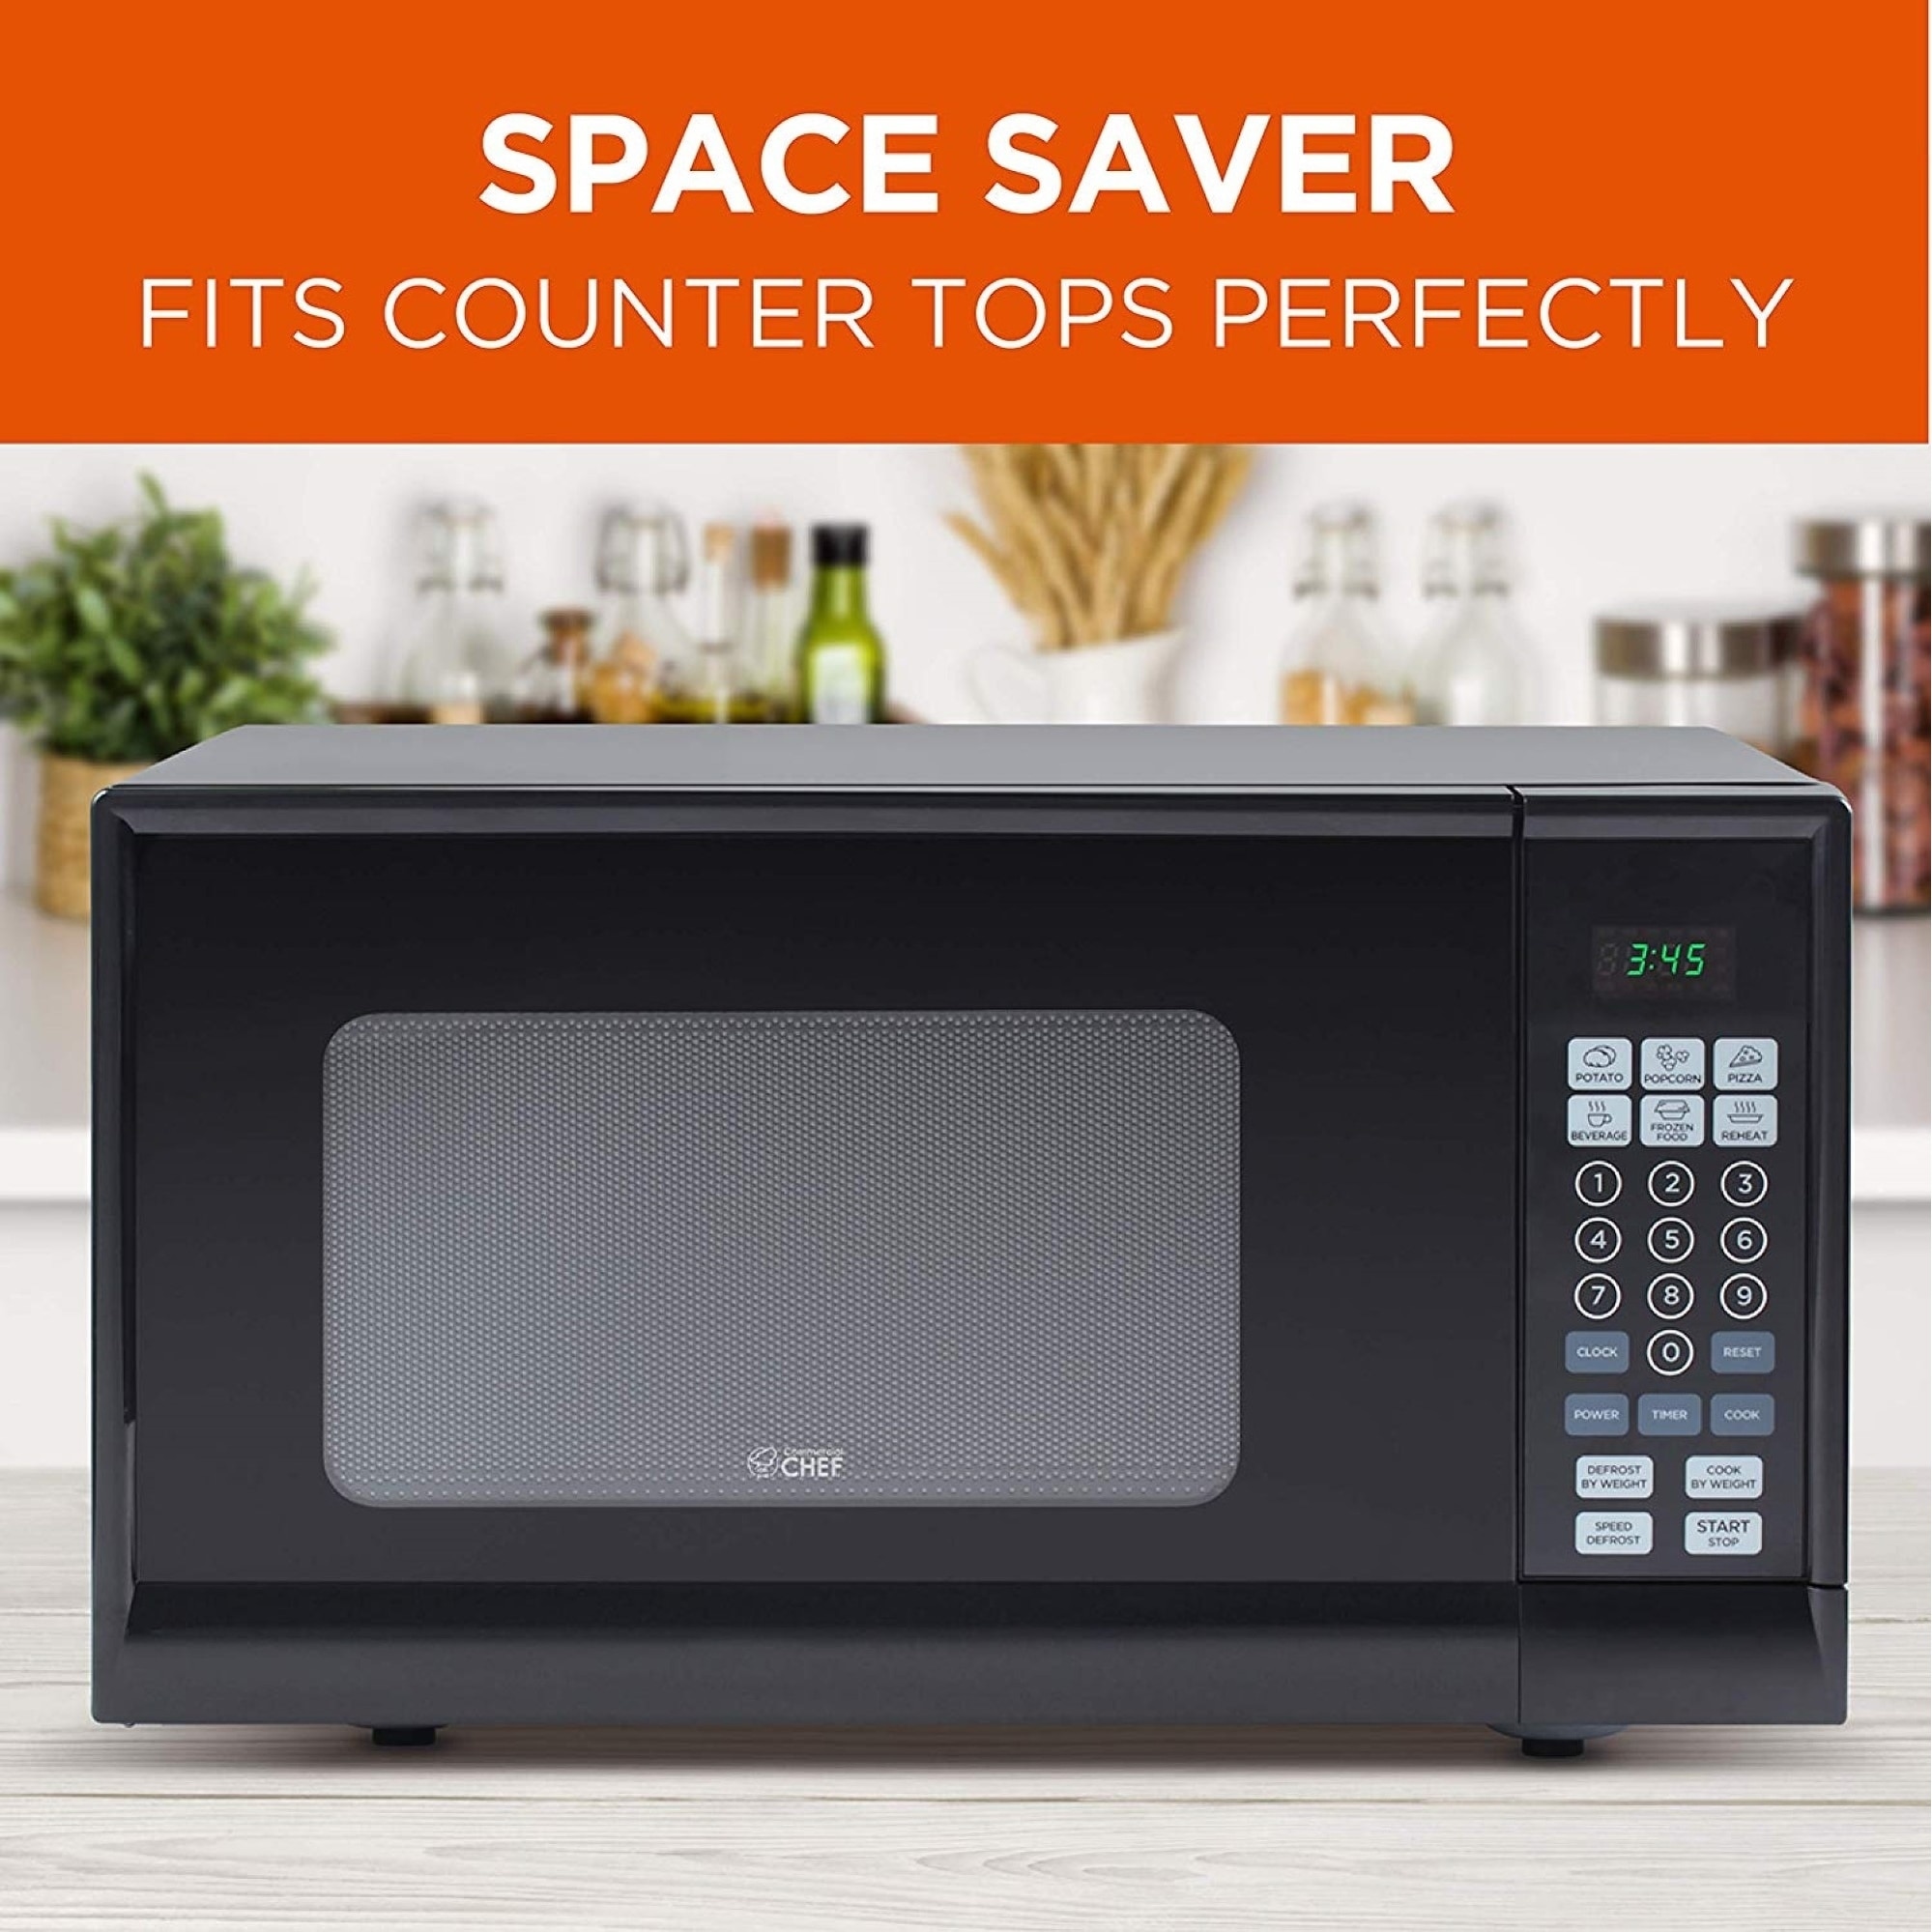 Commercial Chef 0.9 Cu. Ft. Counter Top Microwave,Black